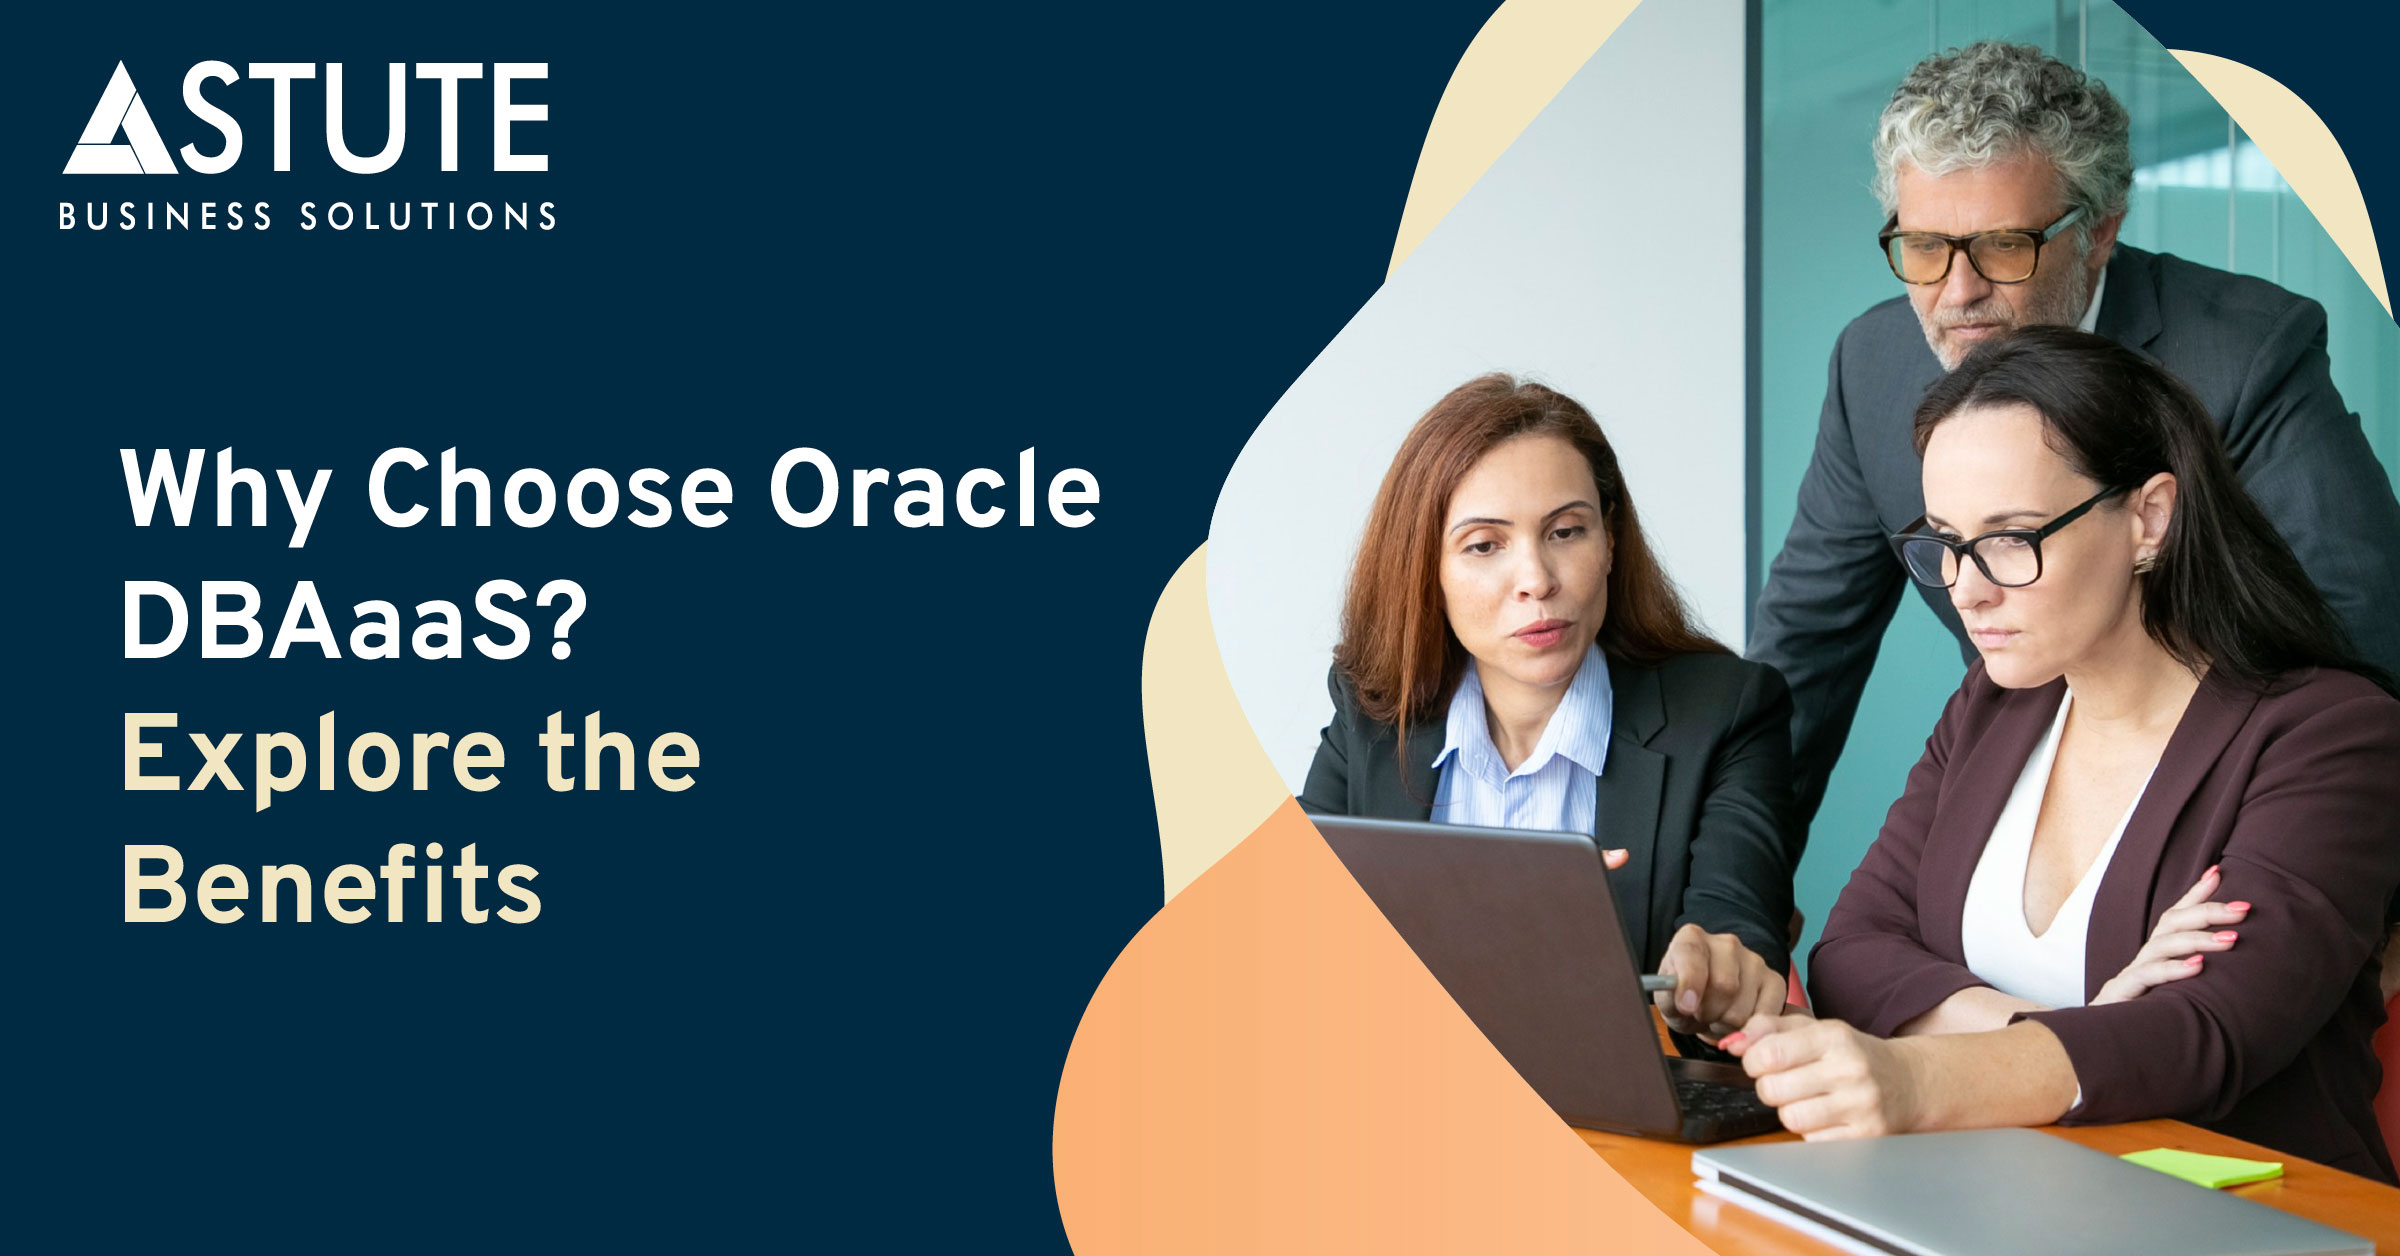 Why Choose Oracle DBAaaS?: Explore the Benefits